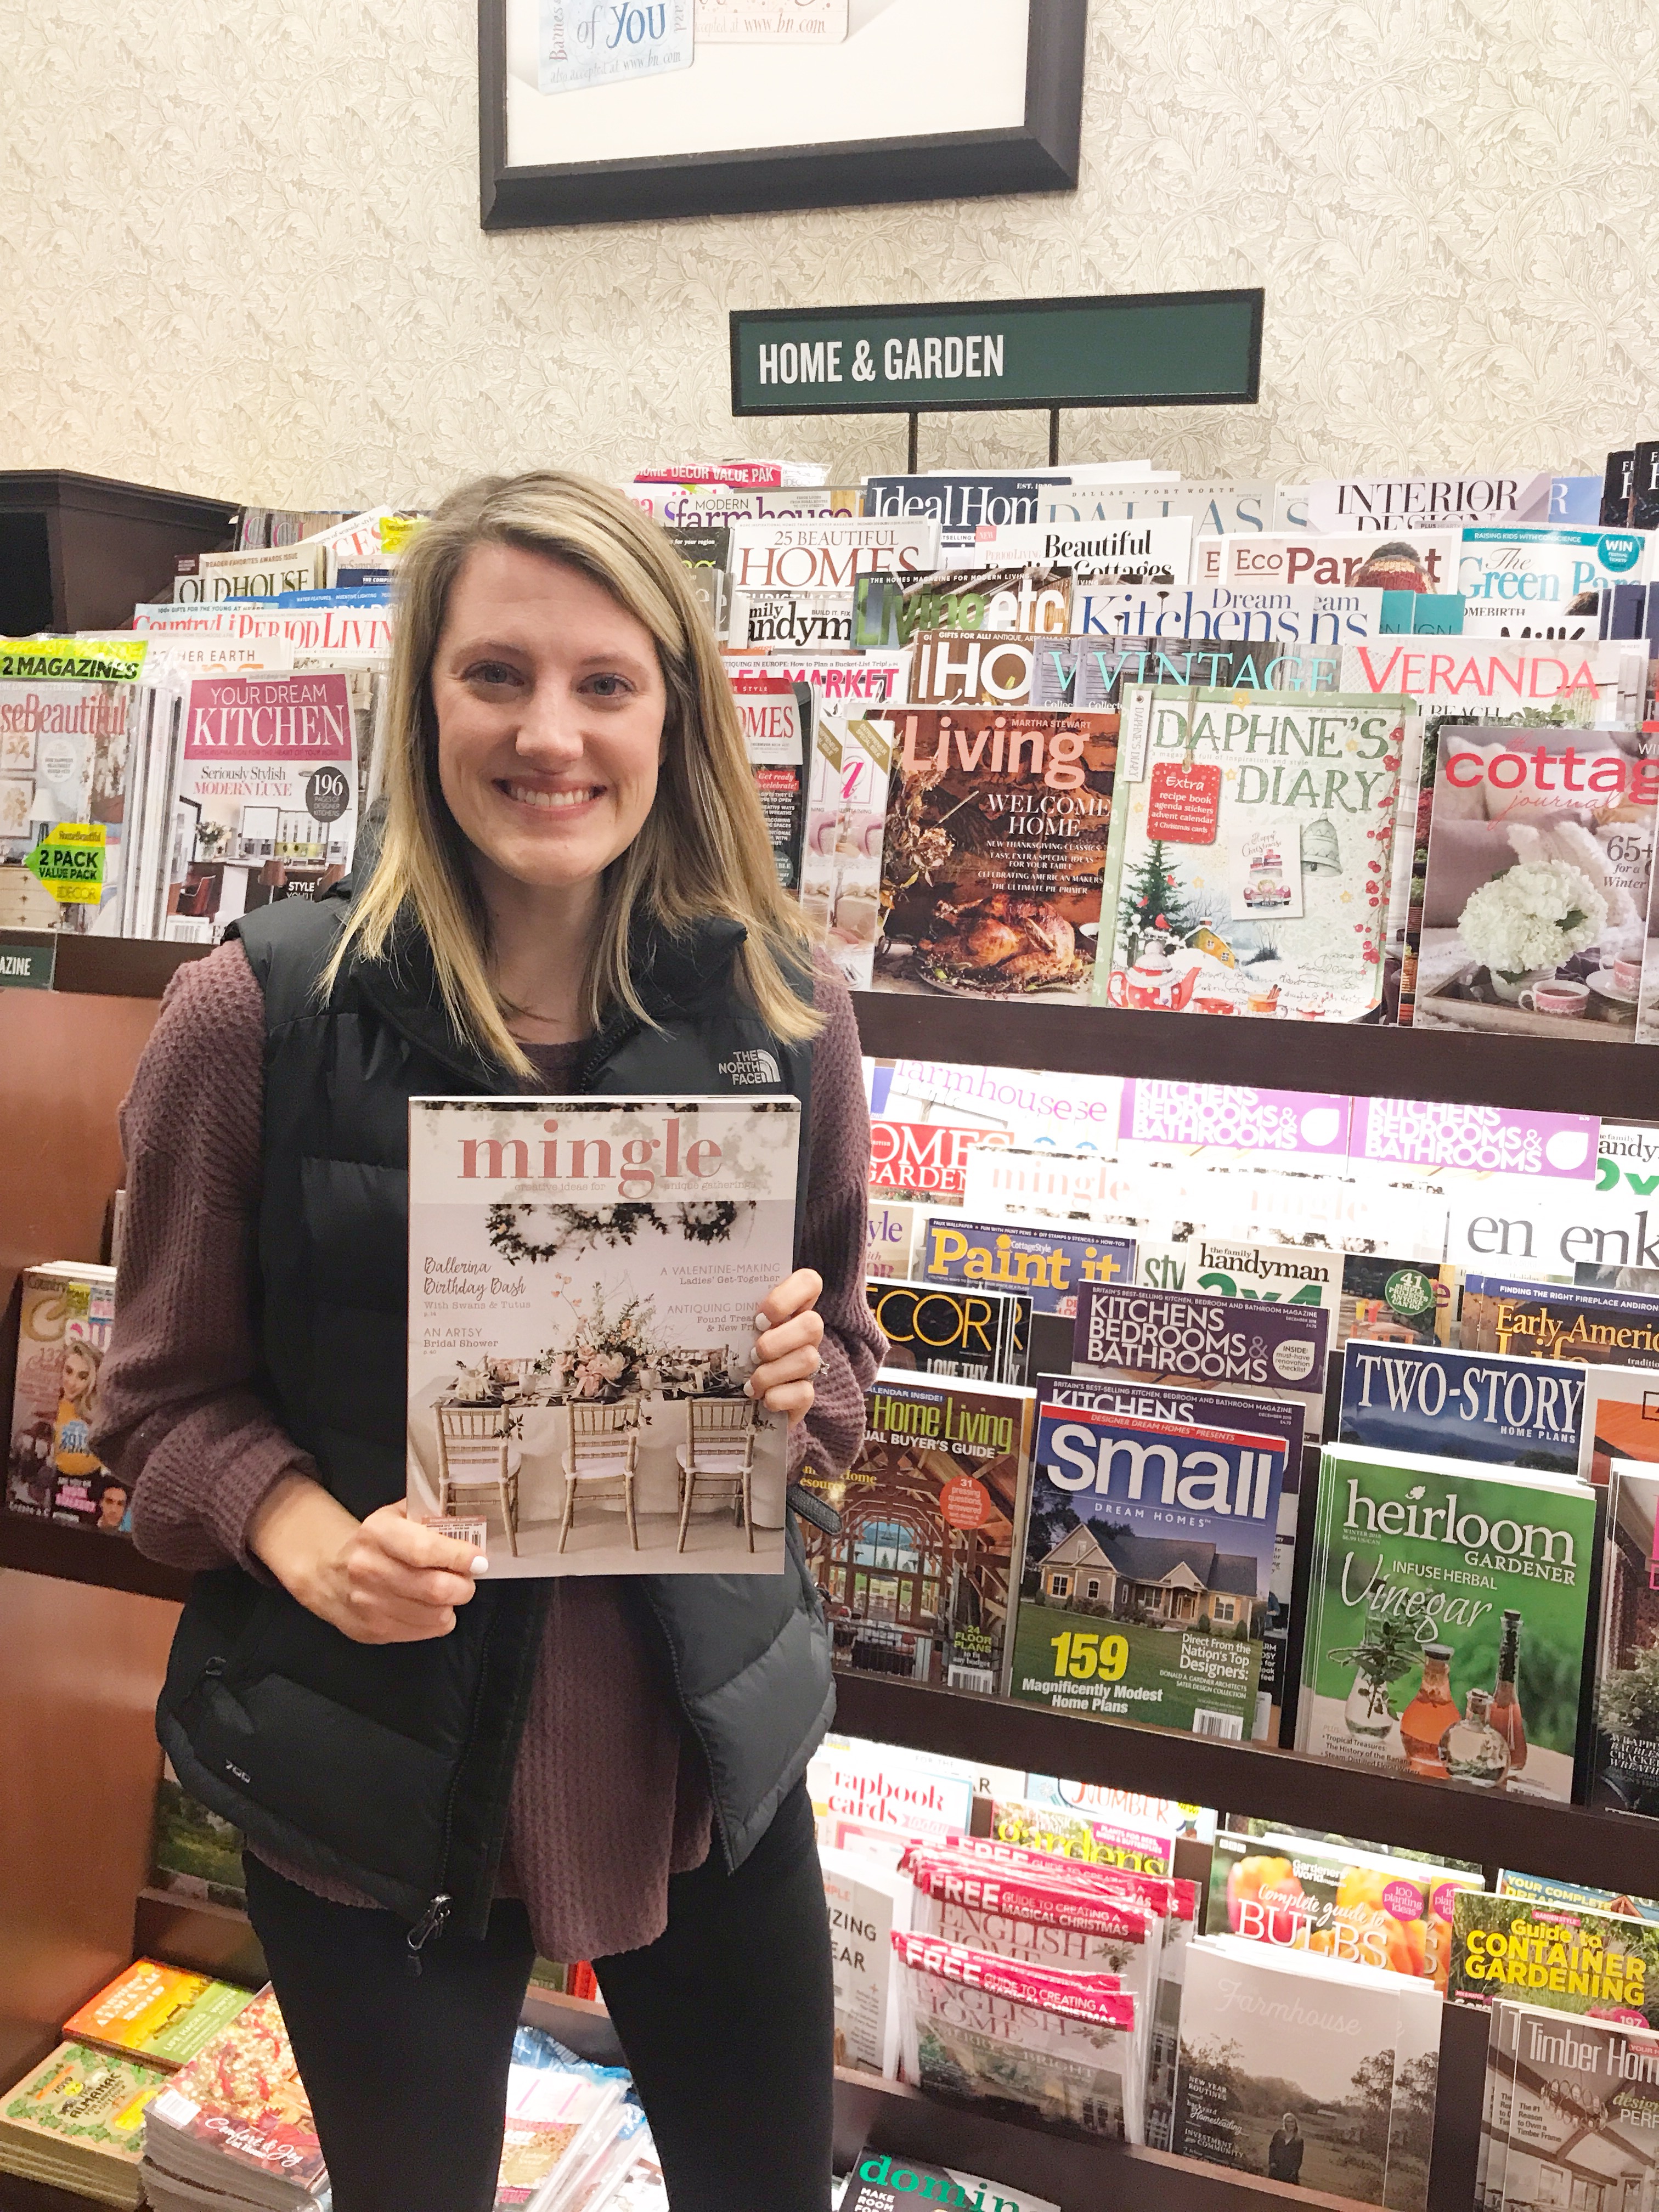 Allison Carter at Barnes and Noble holding Mingle Magazine on newsstands